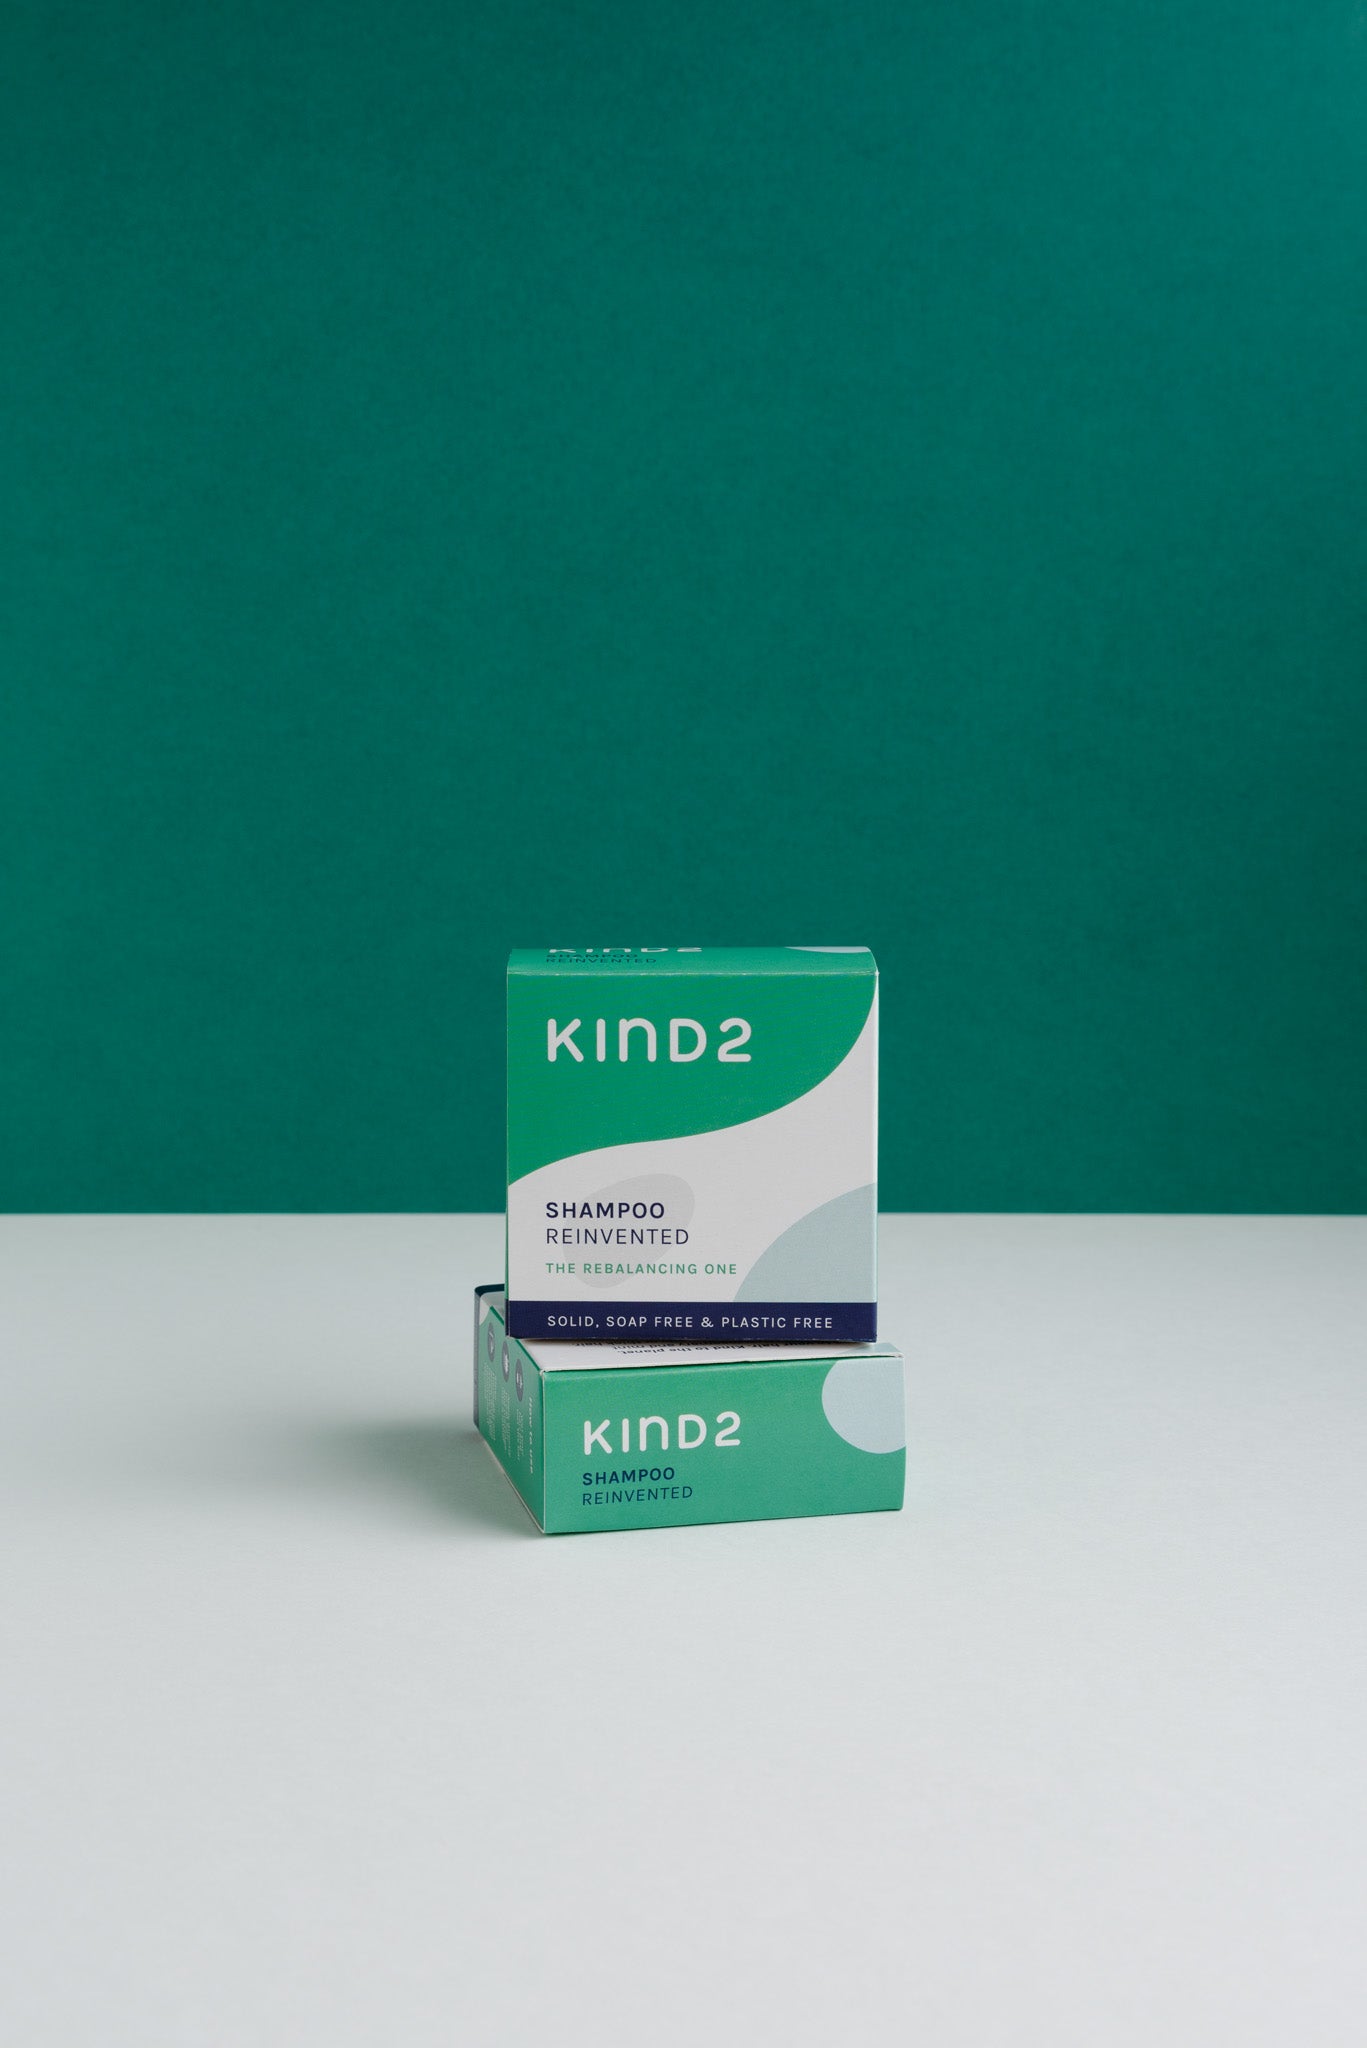 Sustainably packaged cardboard boxes of the KIND2 shampoo bars against a green and white background